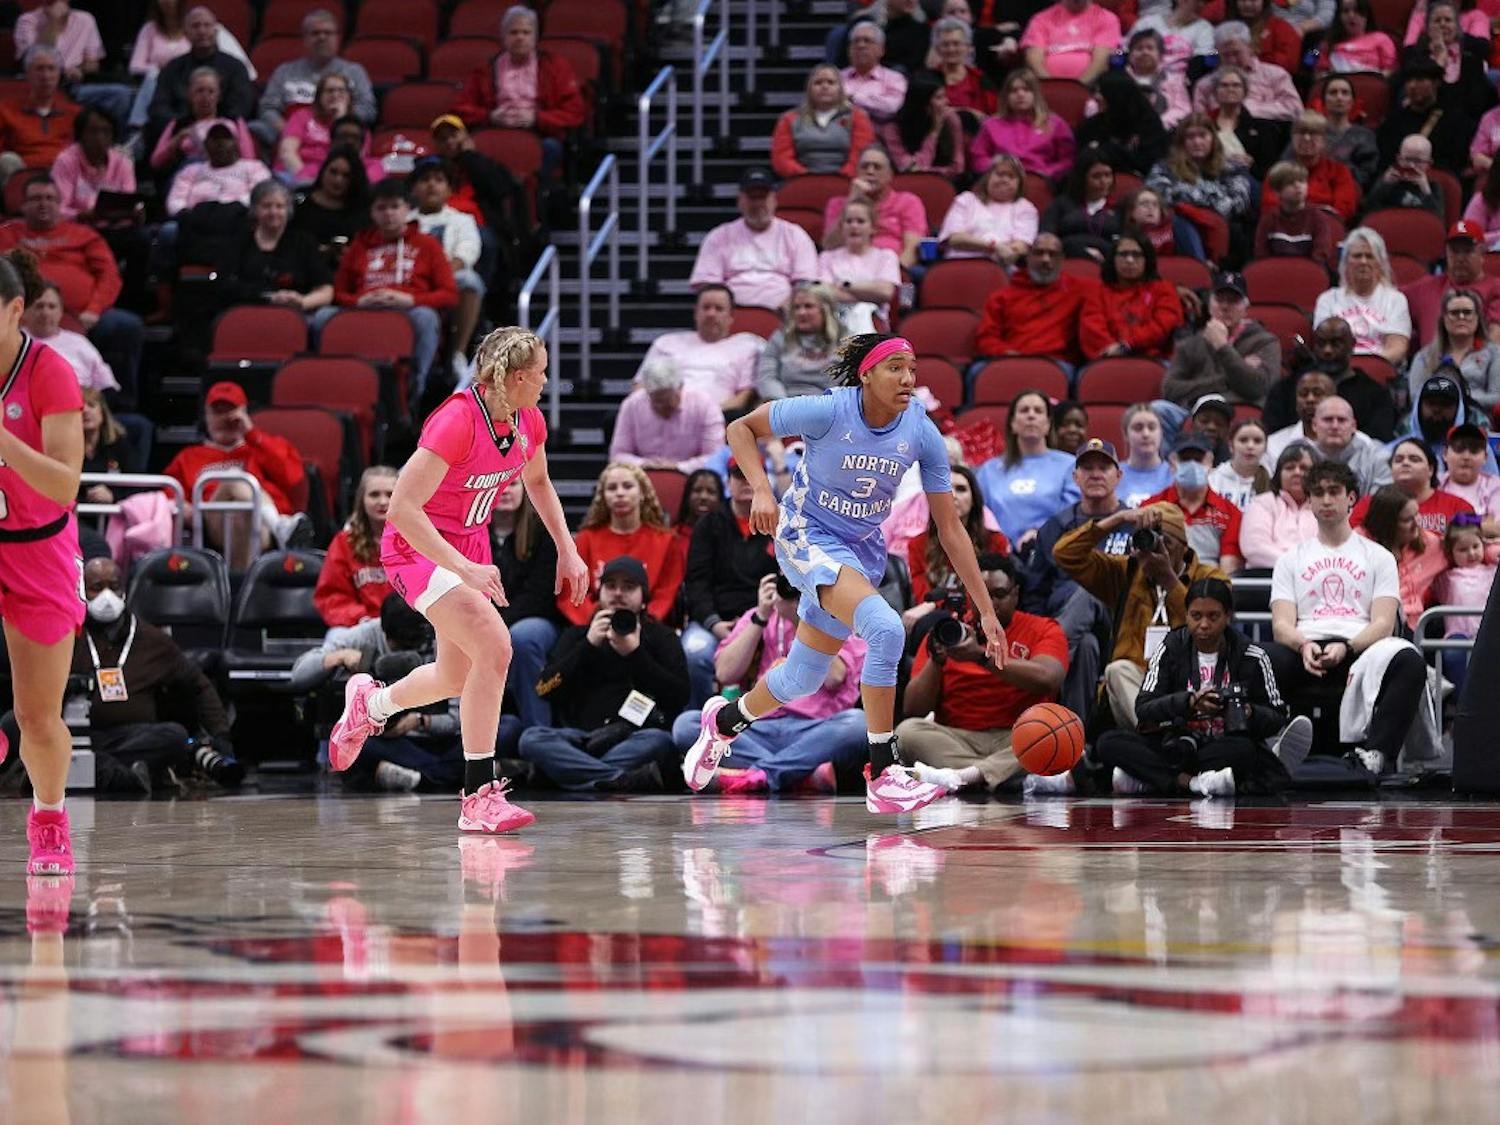 UNC junior wing Kennedy Todd-Williams pushes the ball up the floor against Louisville. UNC lost 62-55. Photo courtesy of UNC Athletic Communications.